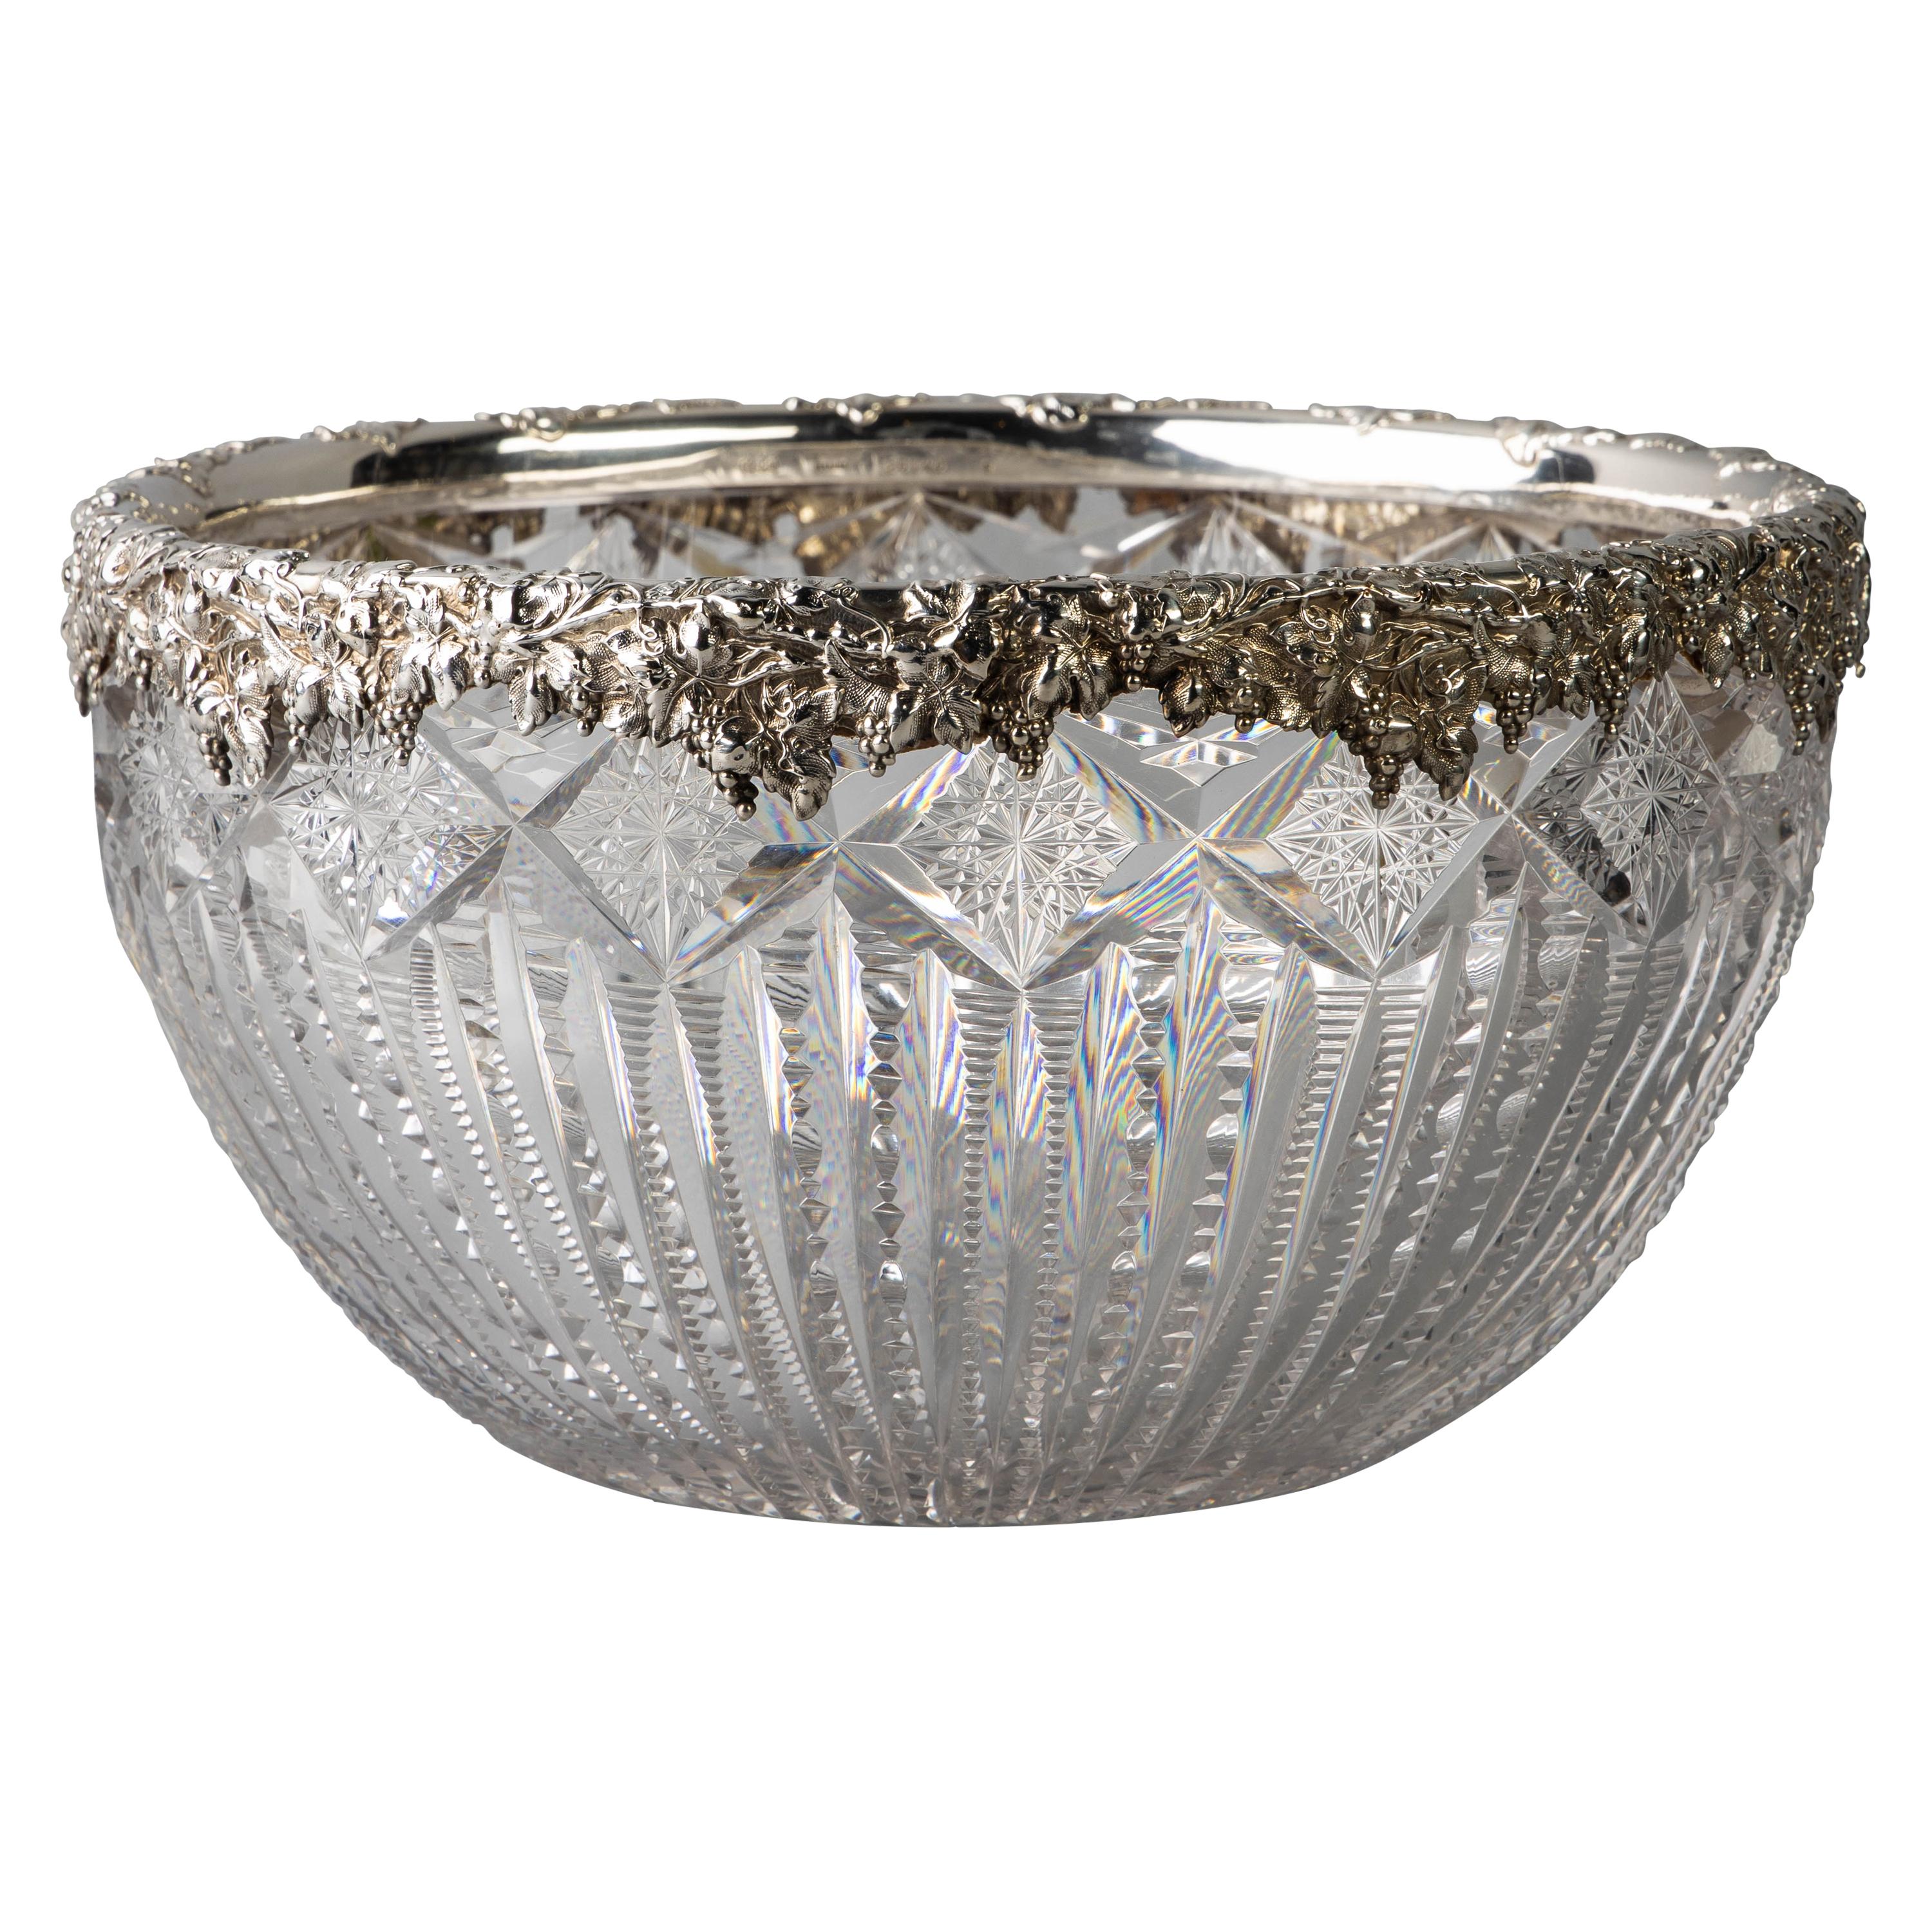 Large Sterling Silver and Brilliant Glass Bowl, Gorham, circa 1900